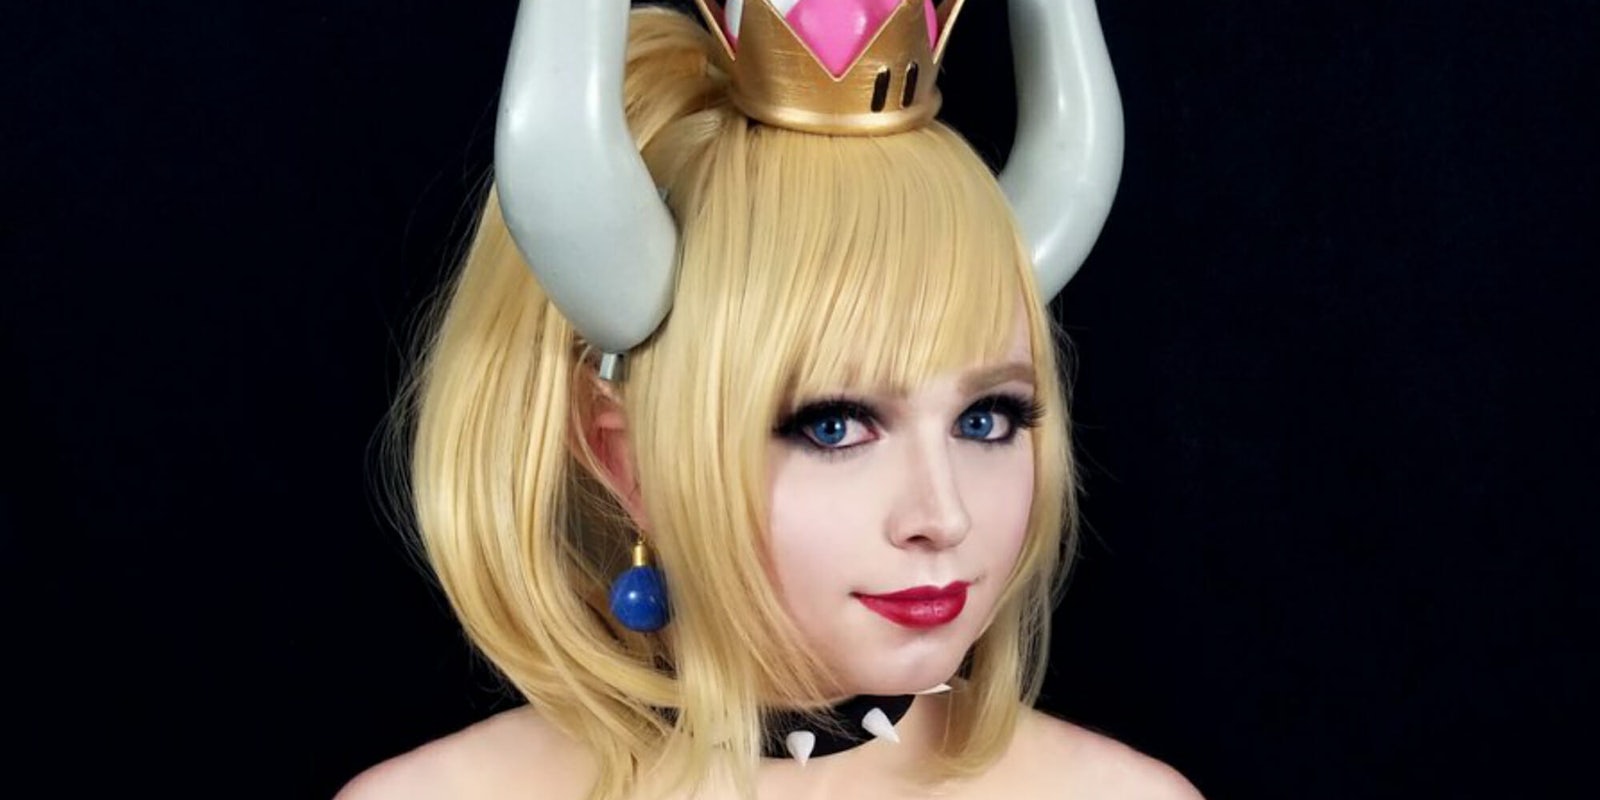 Cloud9's Zach 'Sneaky' Scuderi is going viral for his Peach and Bowsette cosplay.